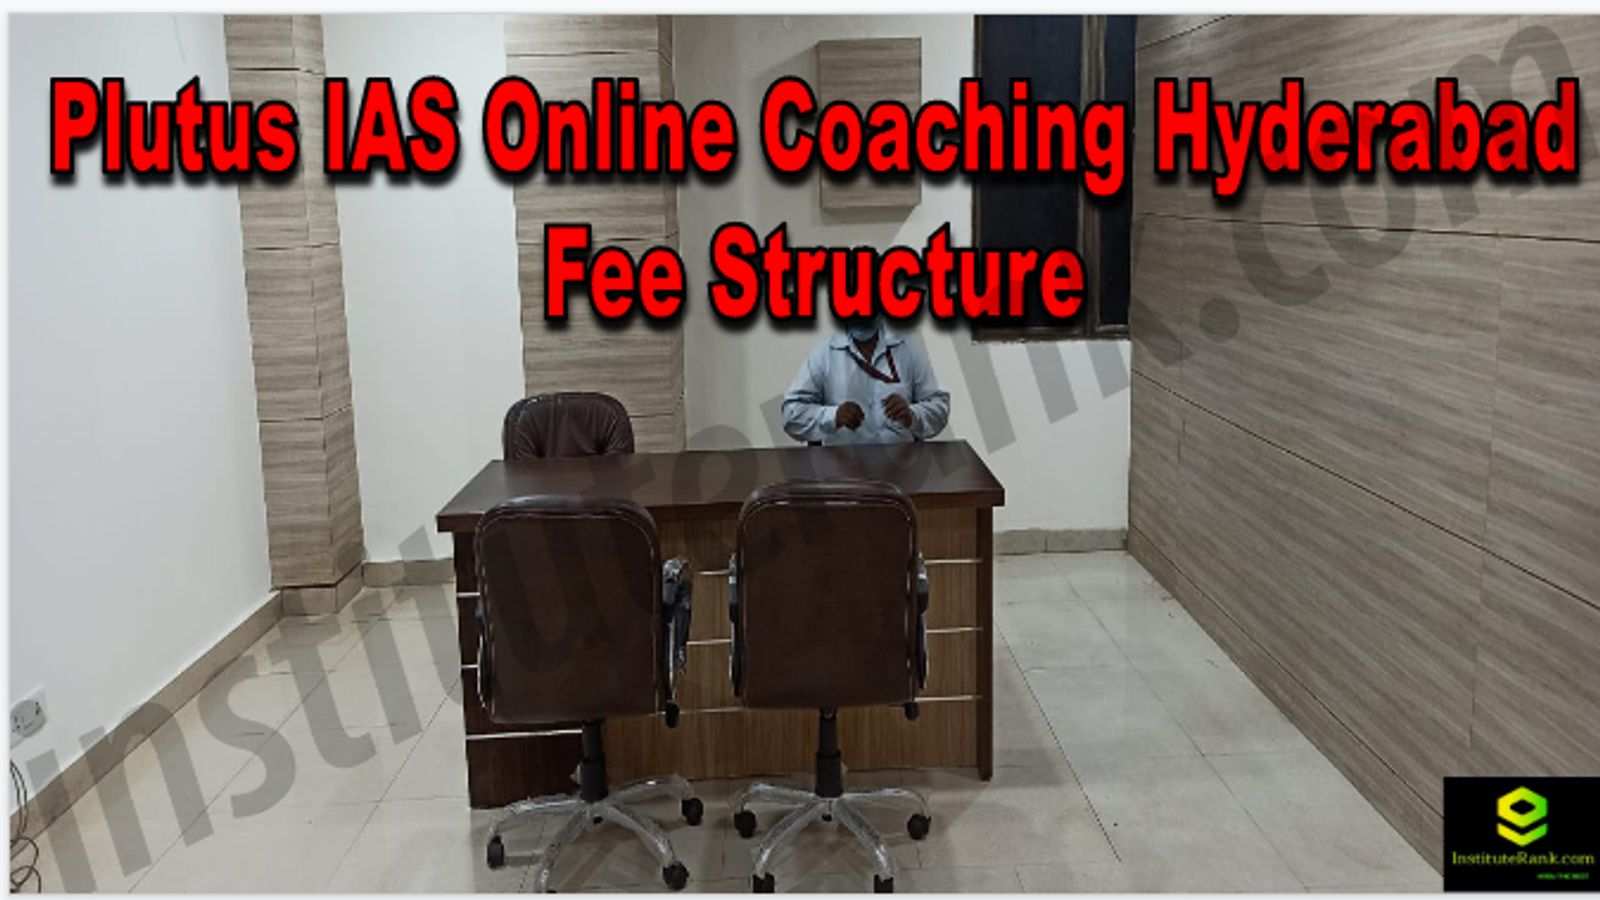 Plutus IAS Online Coaching Hyderabad Reviews Fee Structure